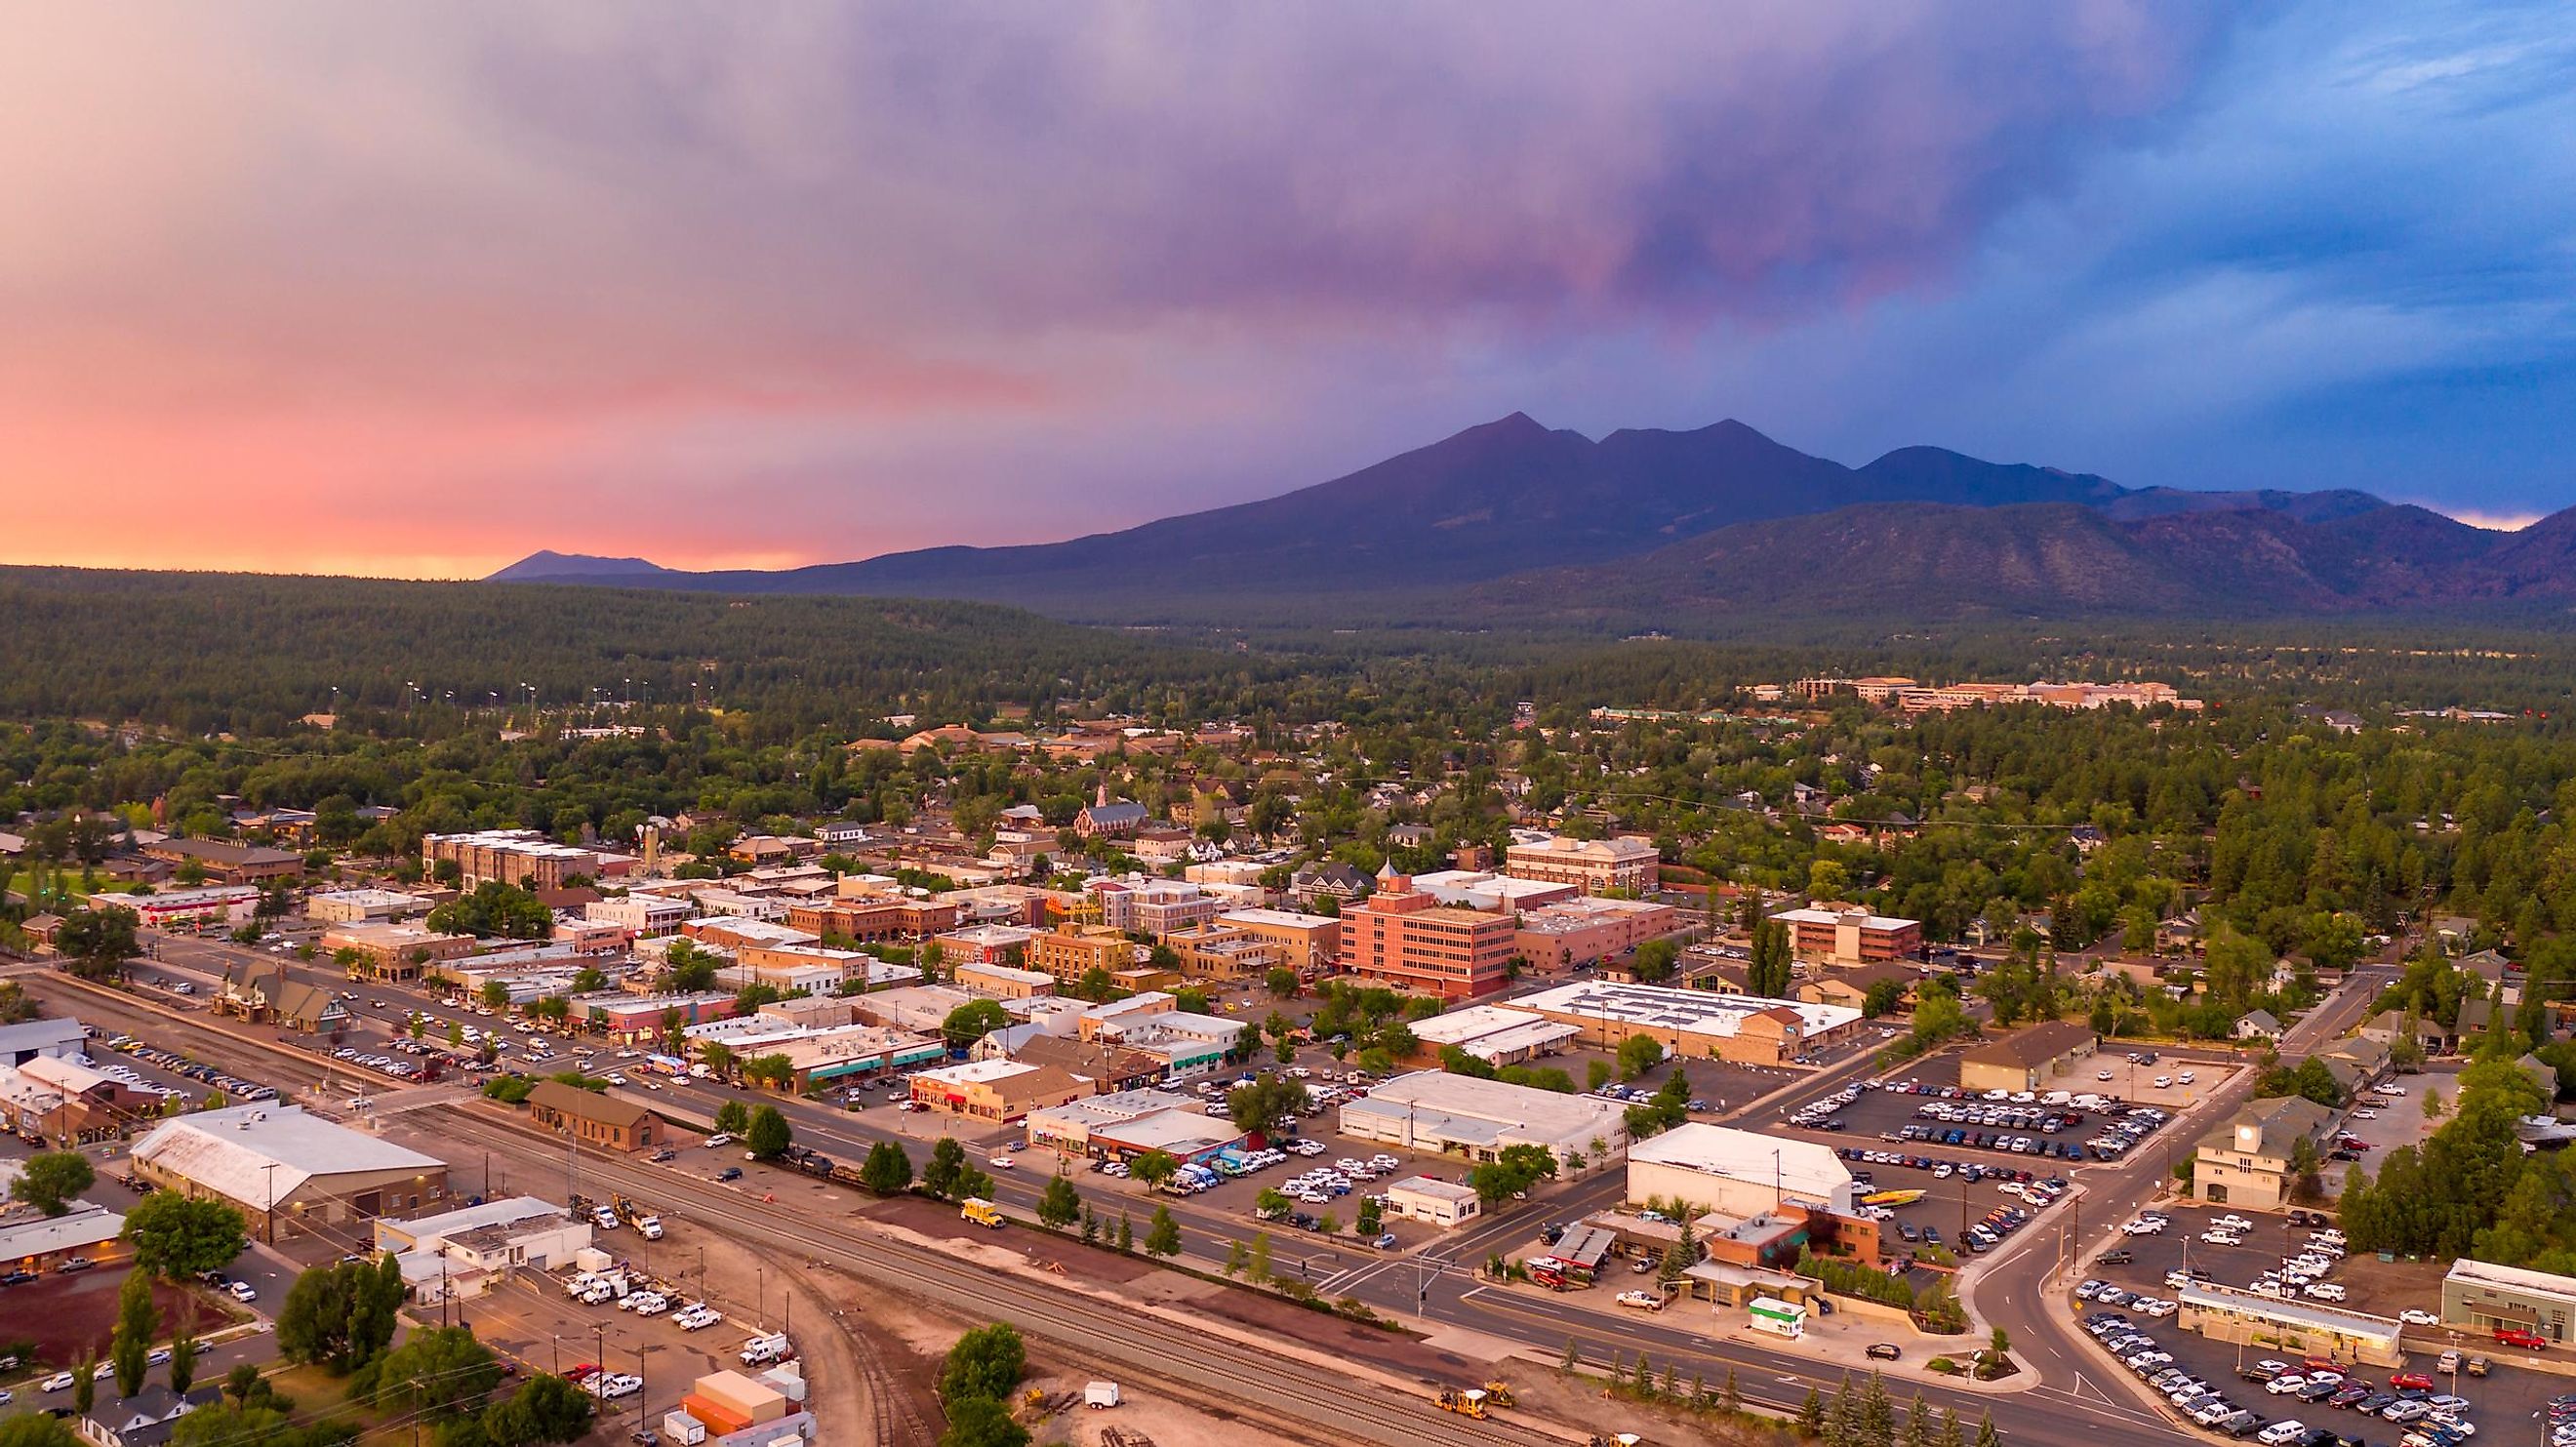 Blue and Orange color swirls around in the clouds at sunset over Flagstaff Arizona